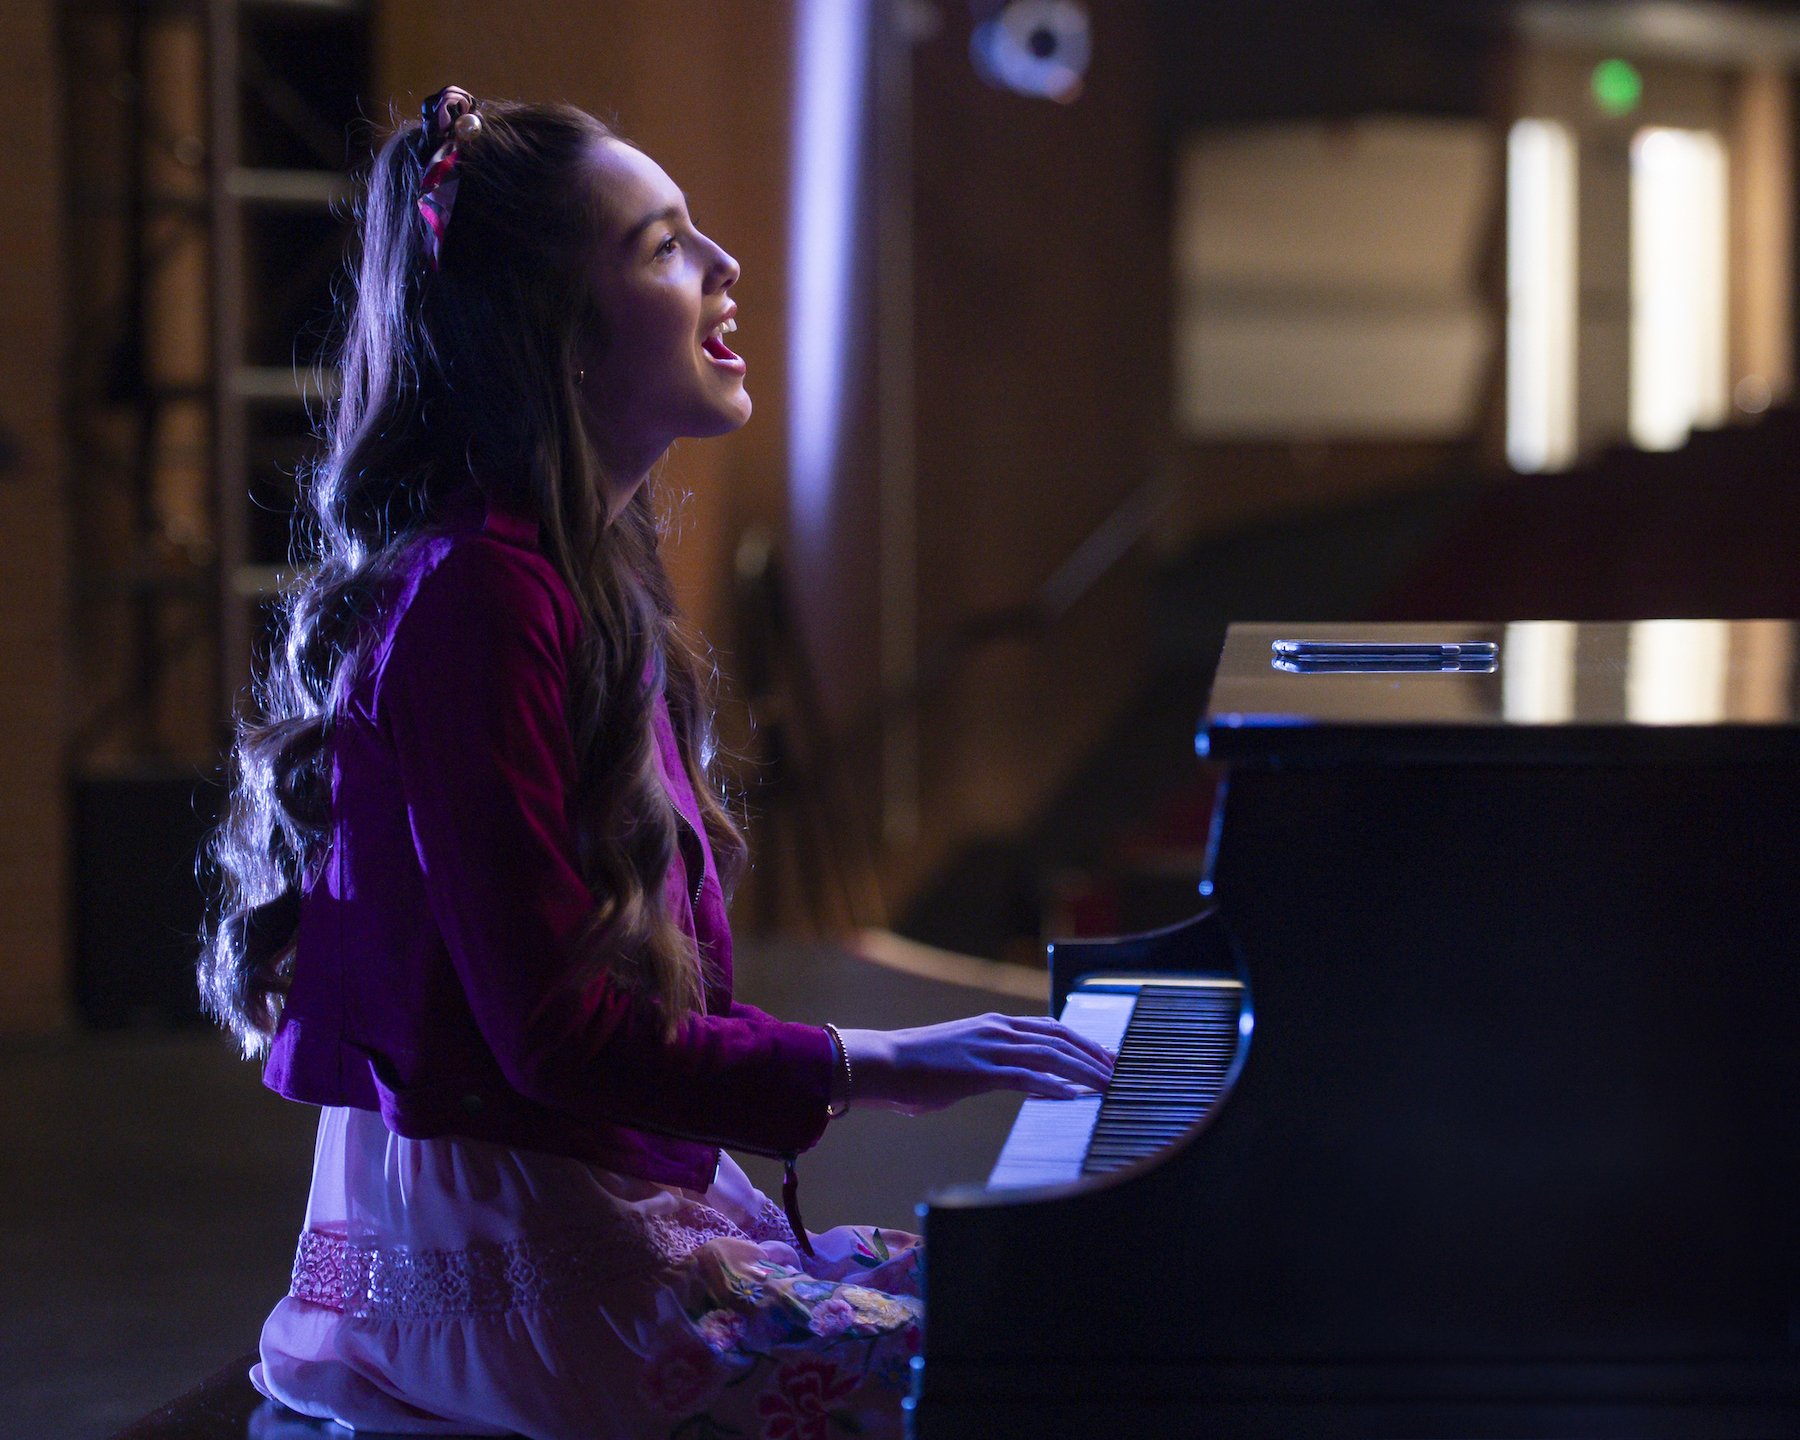 Olivia Rodrigo as Nini in the Disney+ series, 'High School Musical: The Musical: The Series' playing the piano and singing